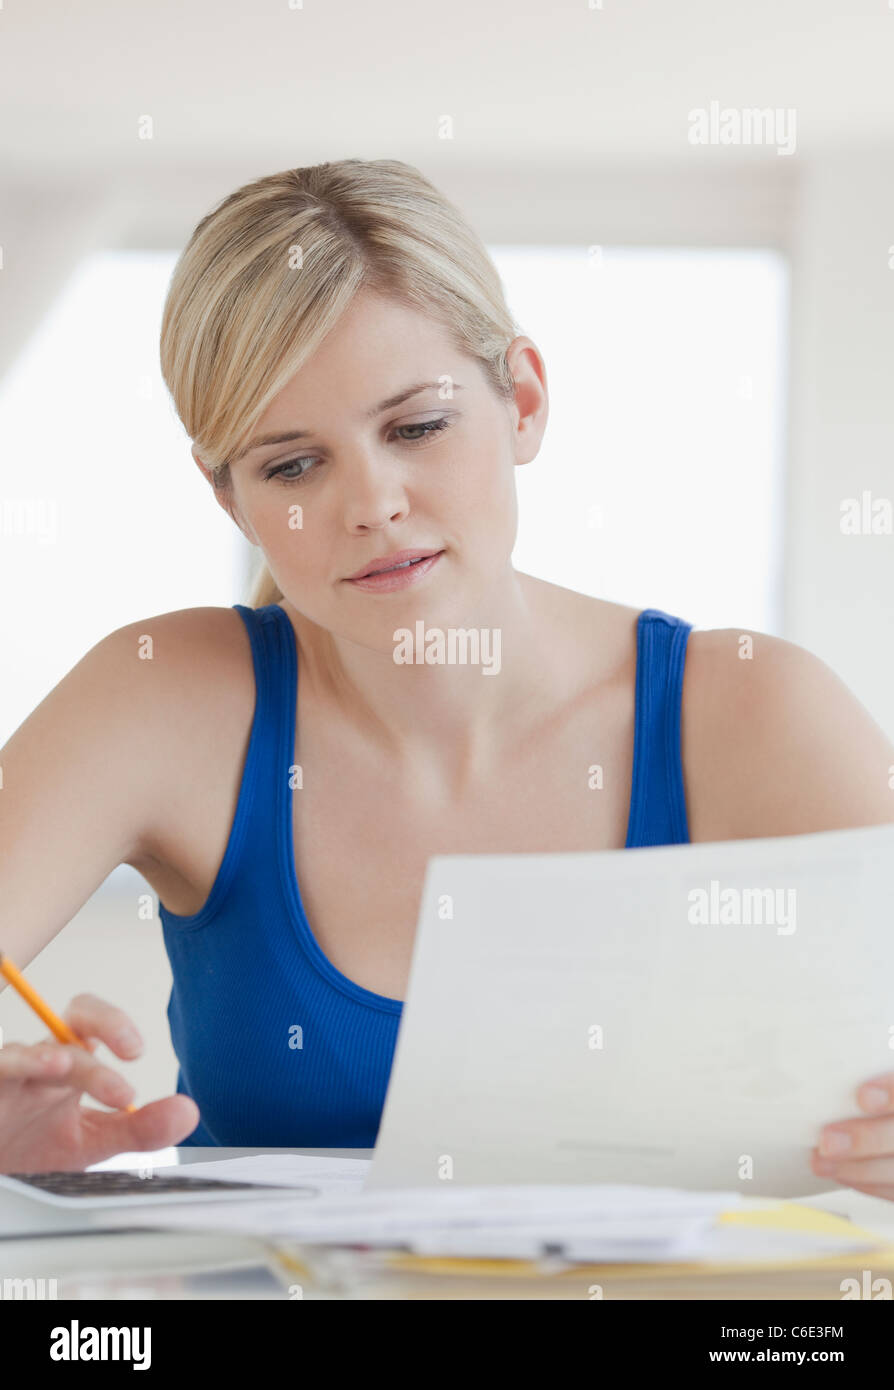 USA, New Jersey, Jersey City, Young blonde woman doing paperwork Banque D'Images